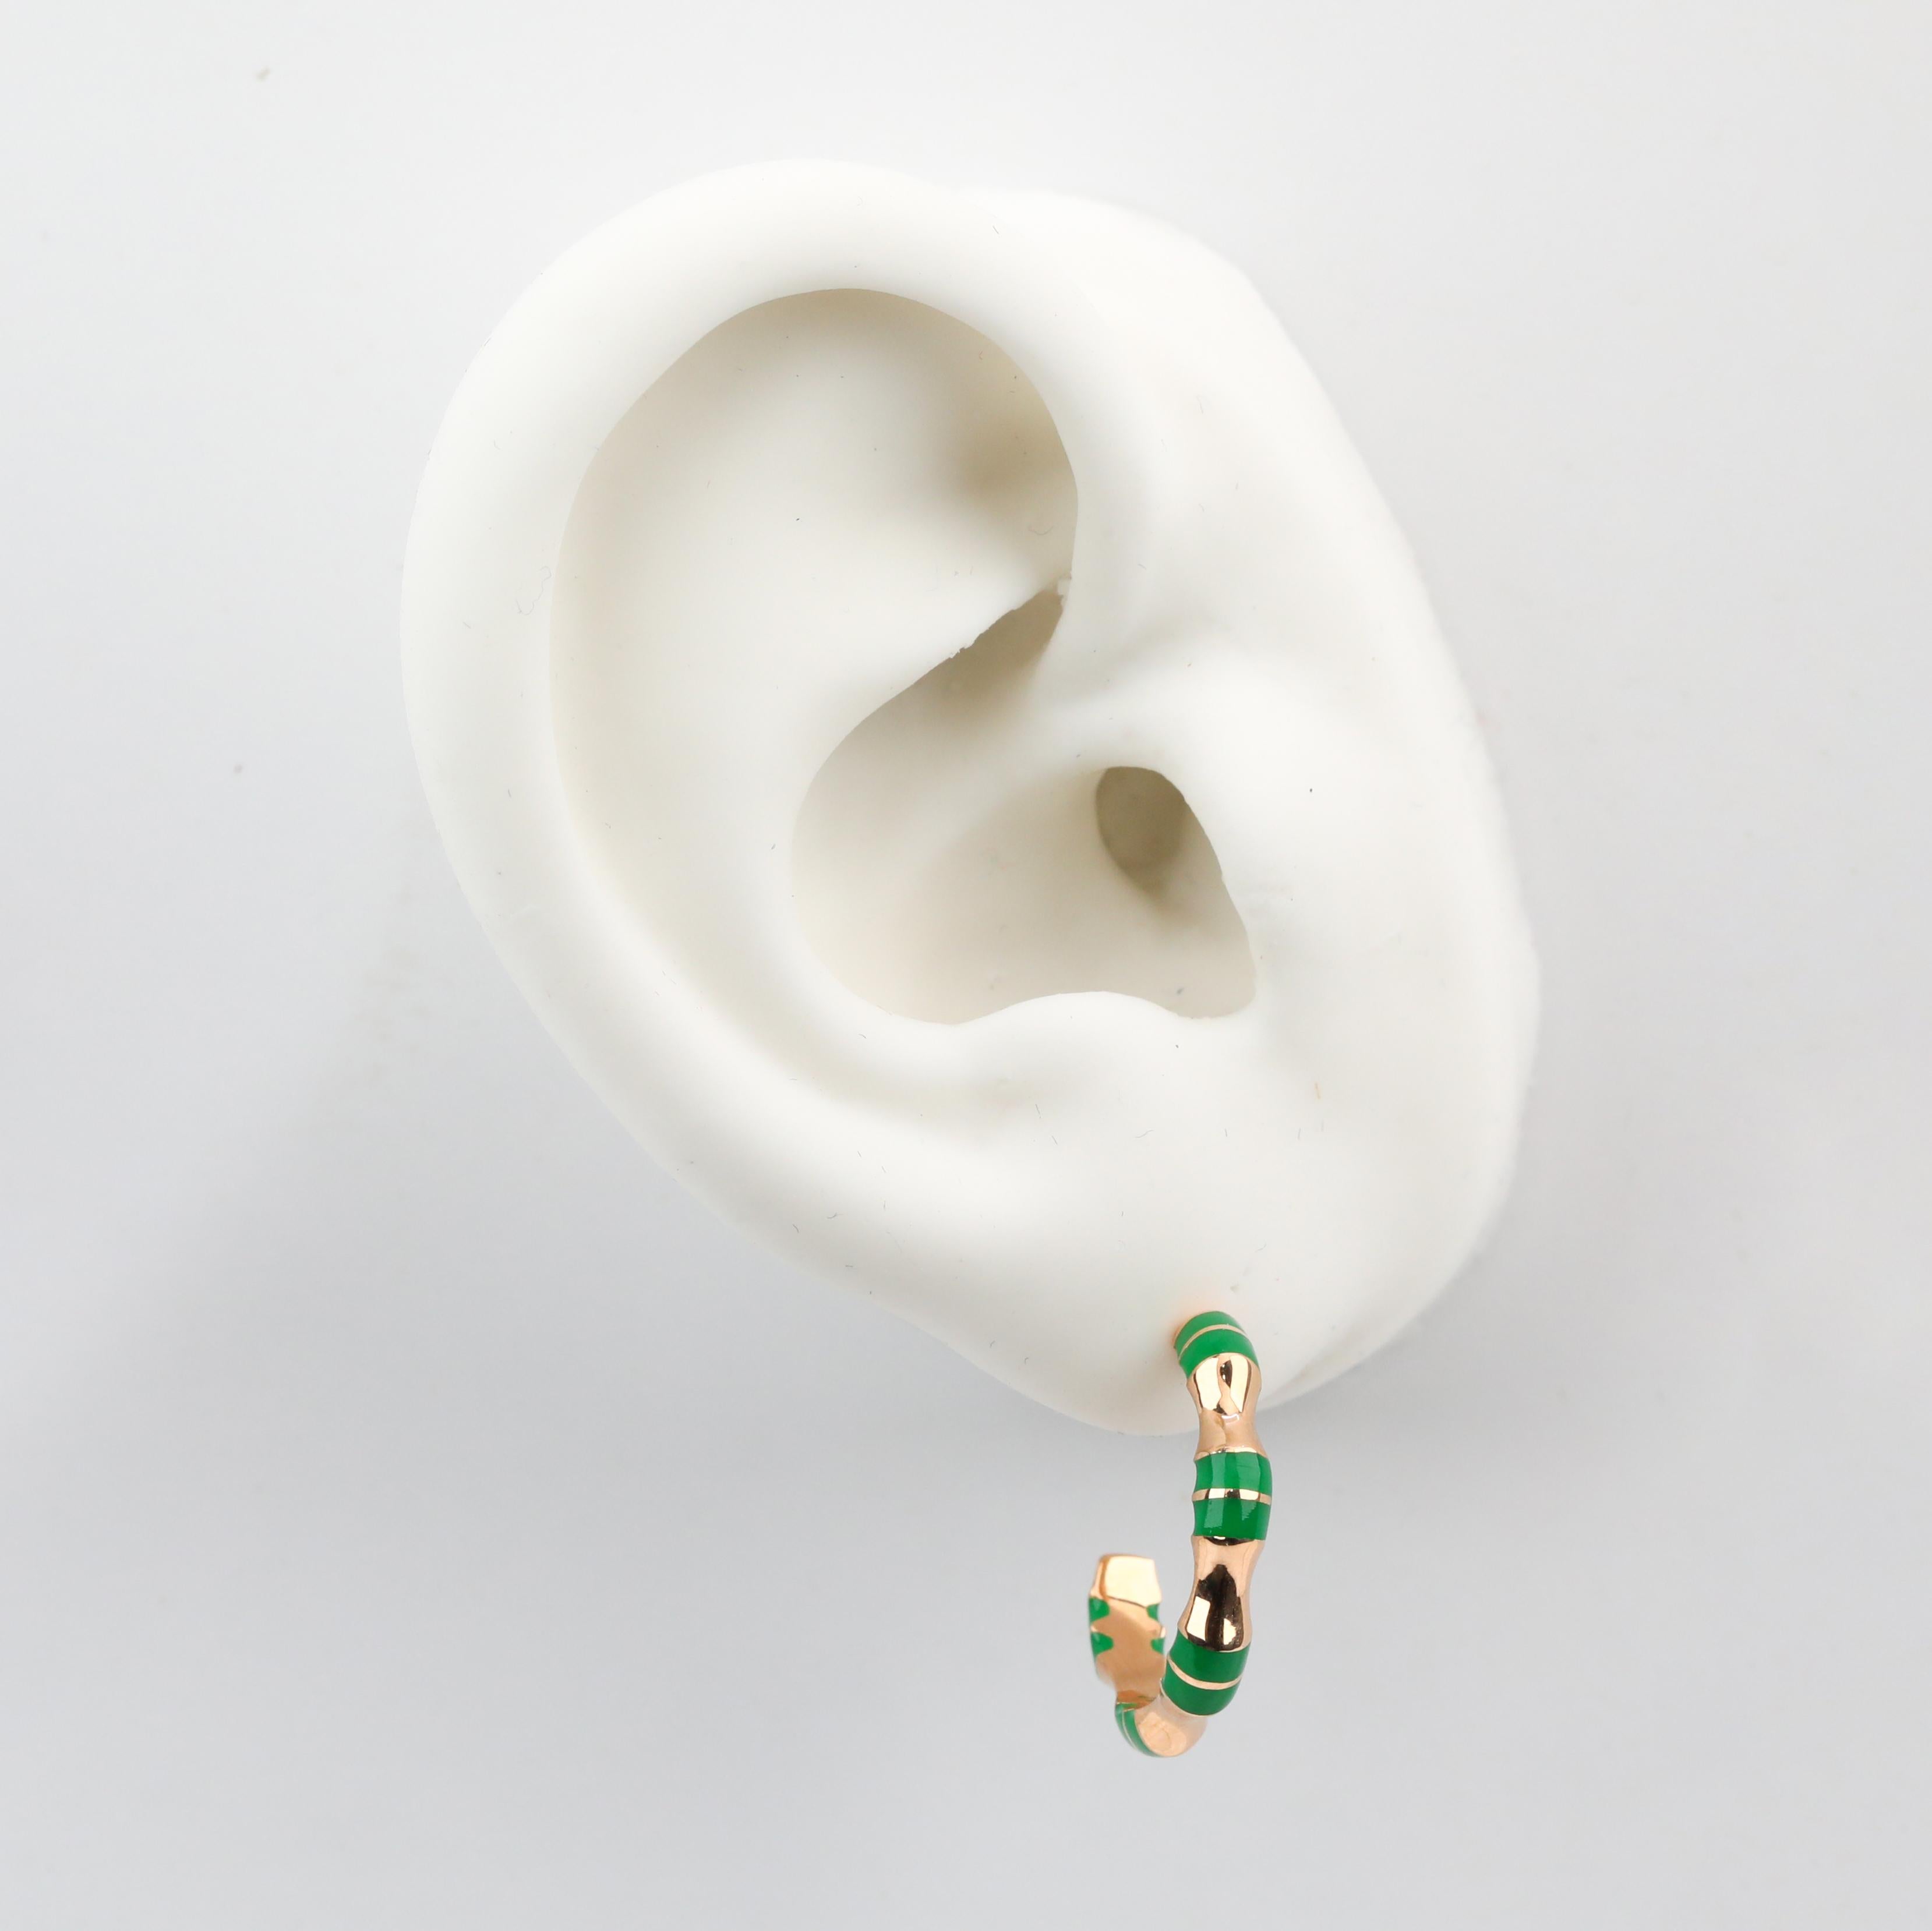 14K Gold Green Enameled Circle Earrings - Solid Gold C Shaped Earrings, Gold and Green Enameled Half Hoop Circle Earrings


This earring was made with quality materials and excellent handwork. I guarantee the quality assurance of my handwork and